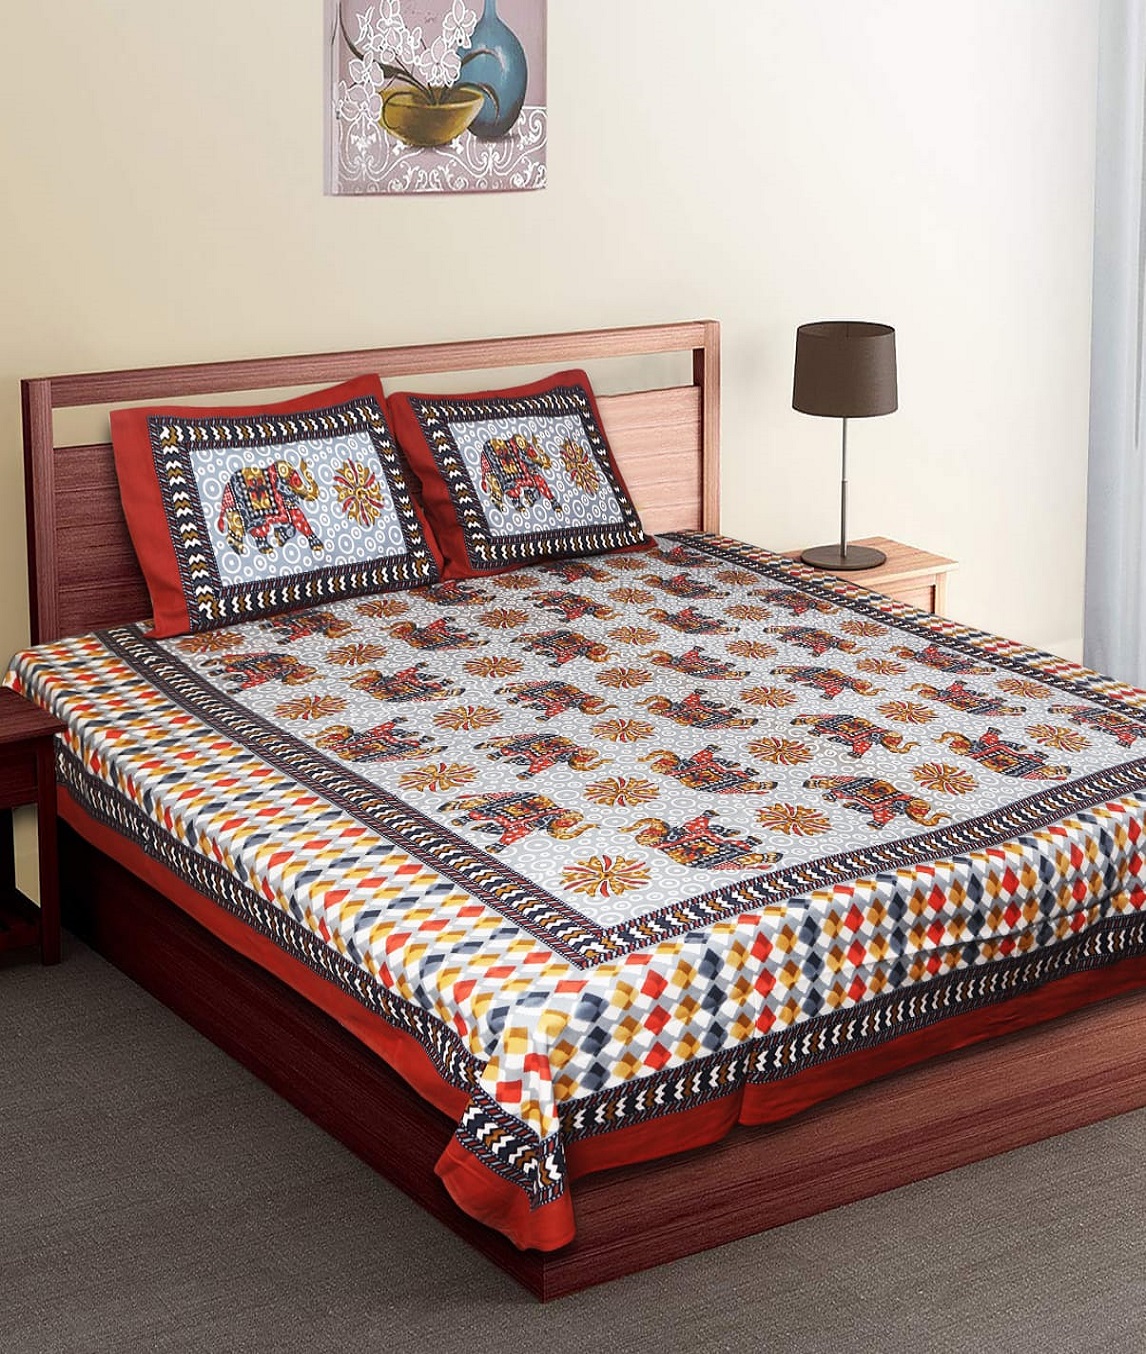 King size bedsheet with pillow covers